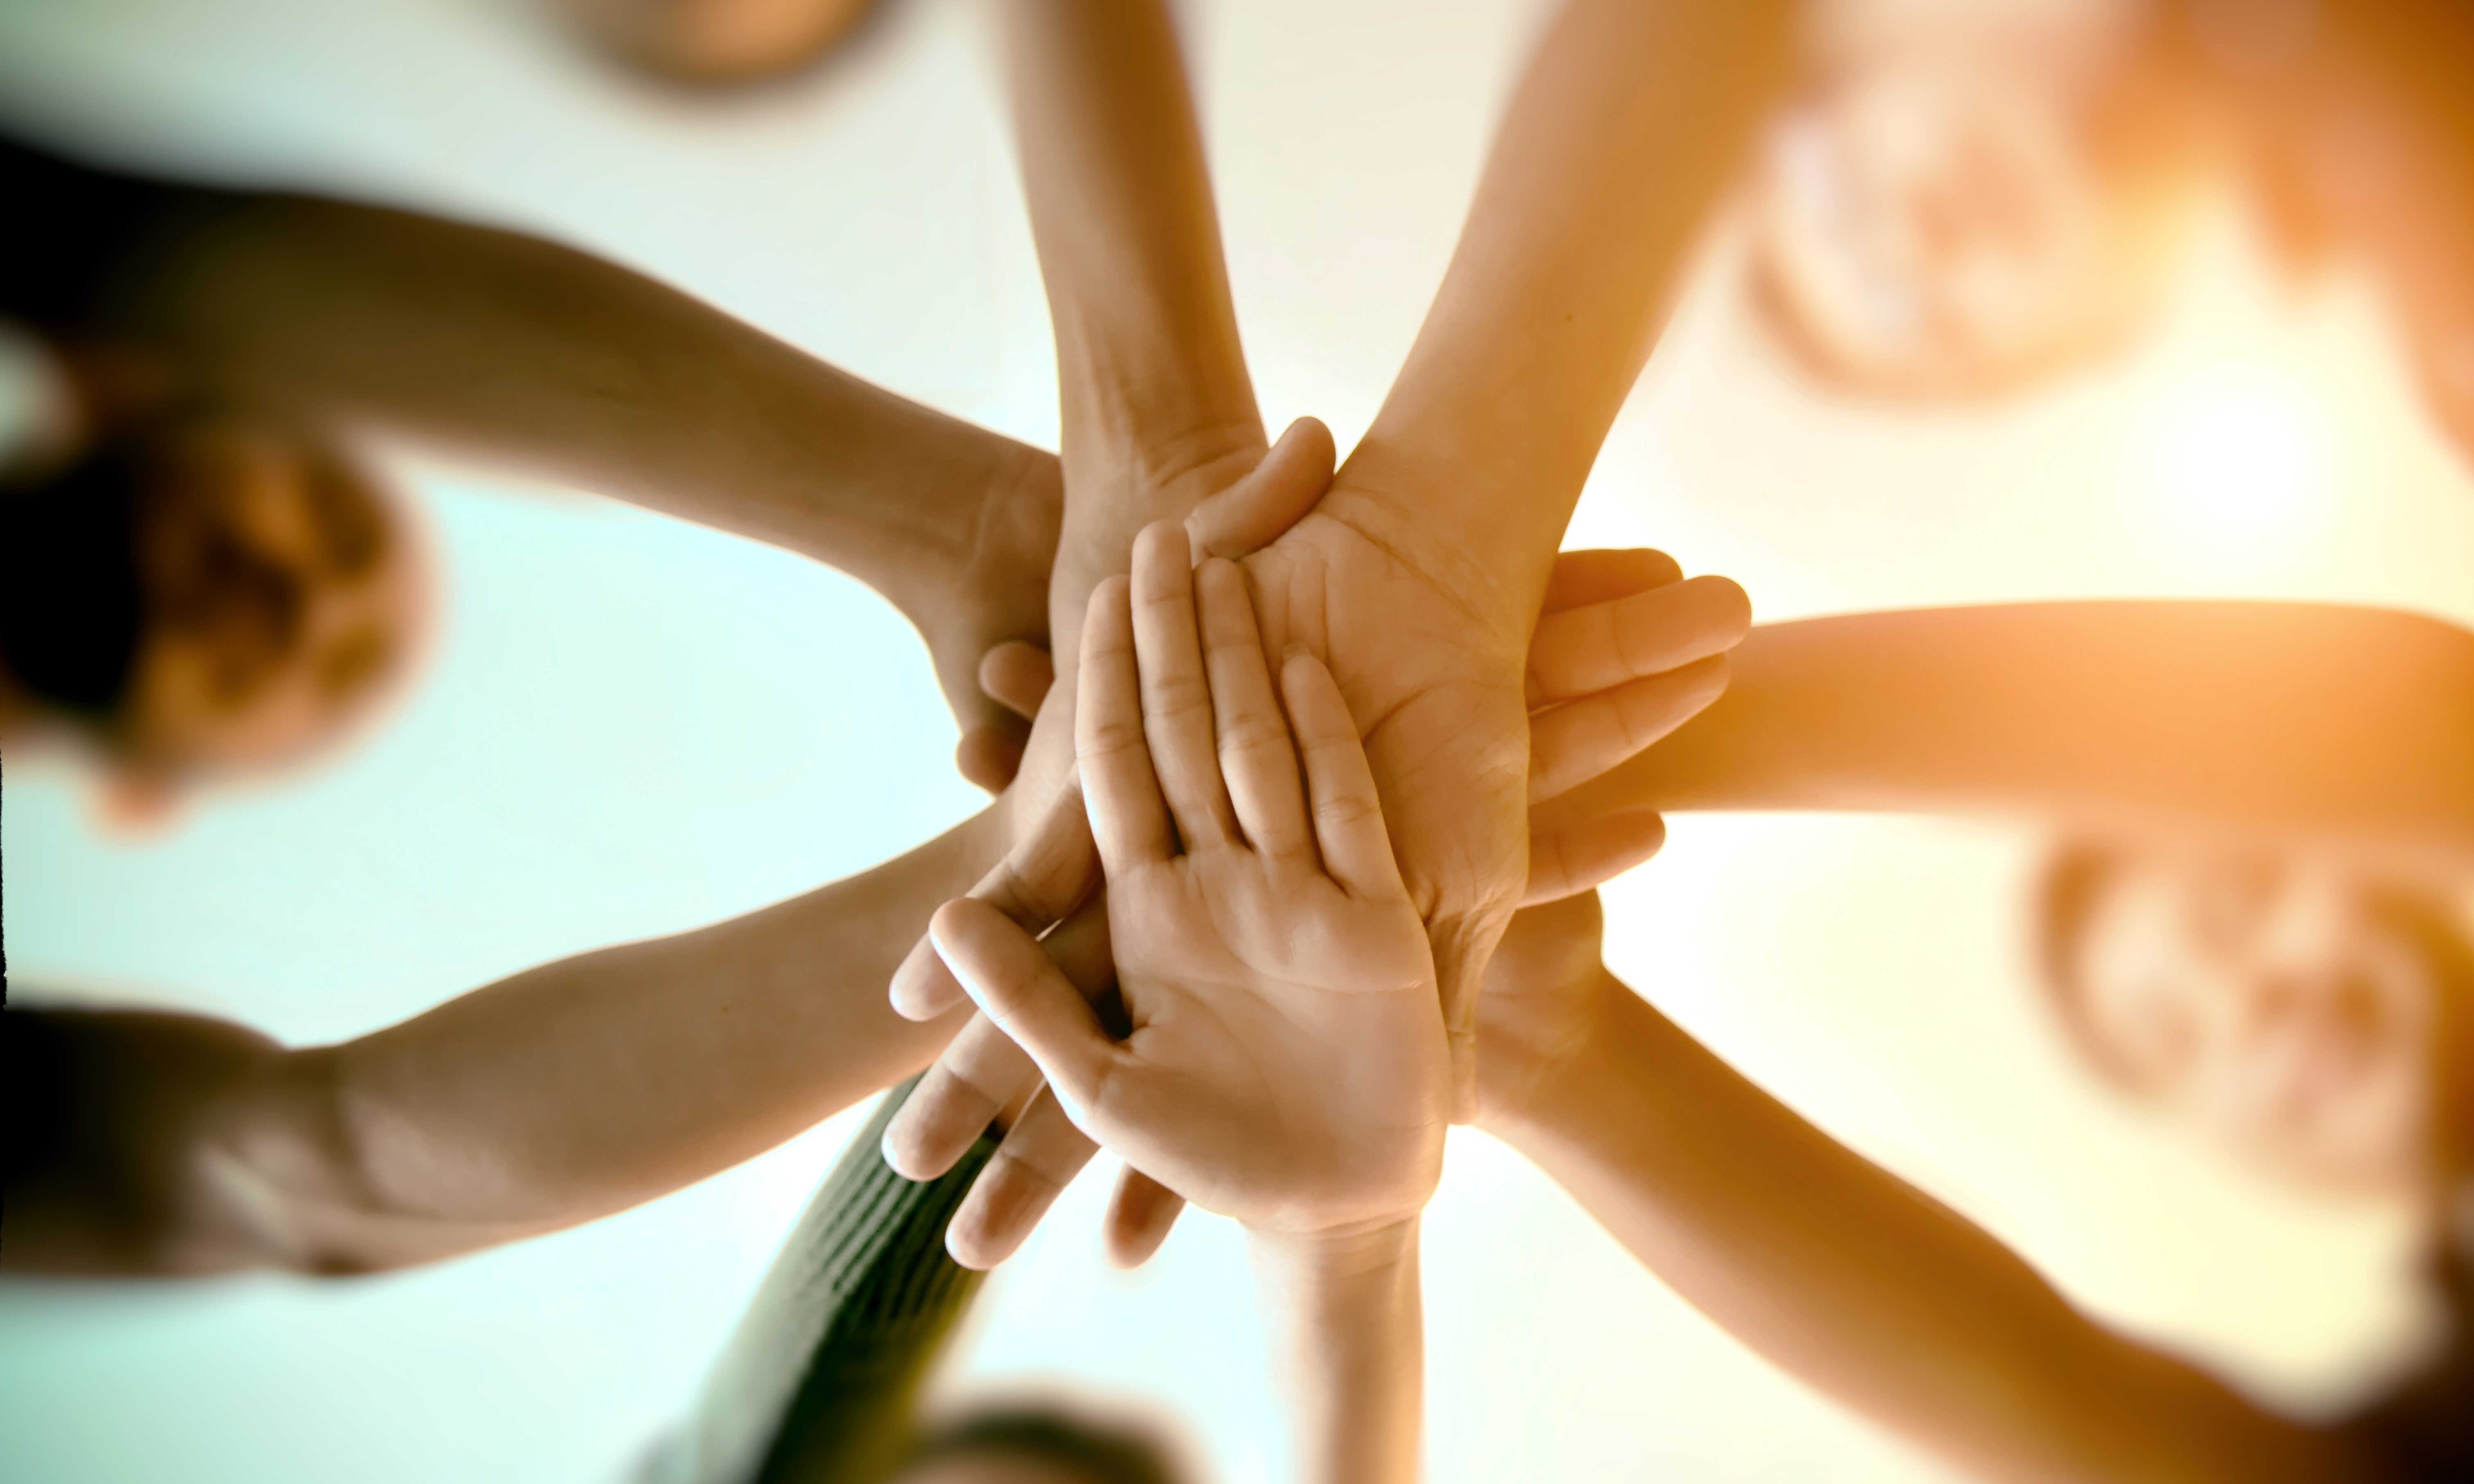 Group of people connecting hands in a show of teamwork